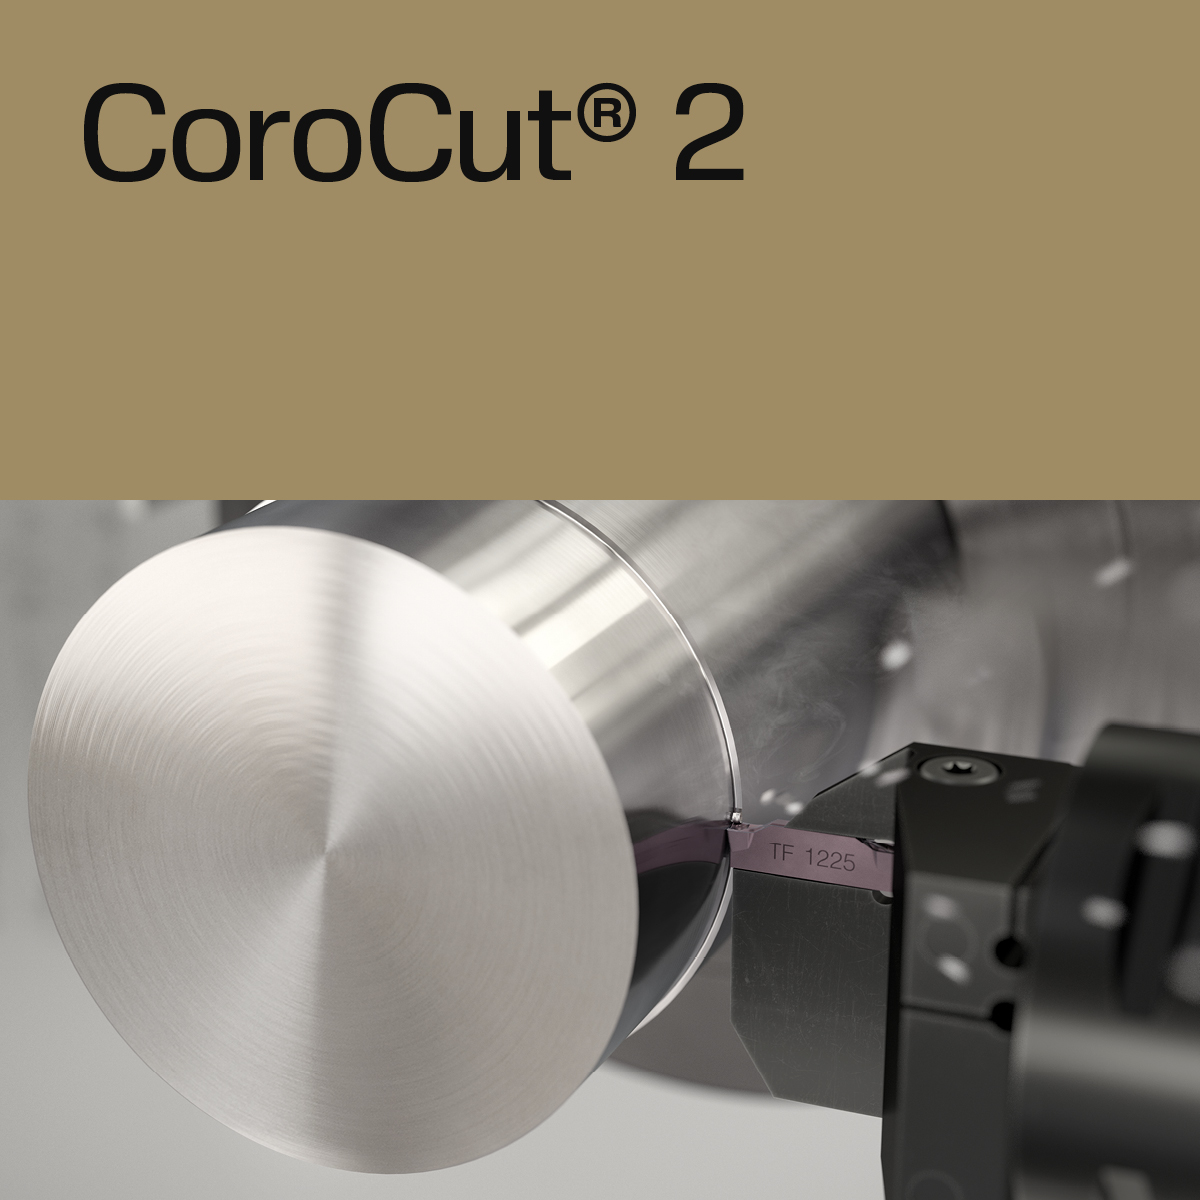 The new upgraded CoroCut® 2 inserts feature the well-established rail interface, even for the smaller insert sizes. Click the link below to learn more about CoroCut 2. 

sandvik.coromant.com/en-gb/tools/pa…

#SandvikCoromant #ShapingTheFutureTogether #CoroCut2